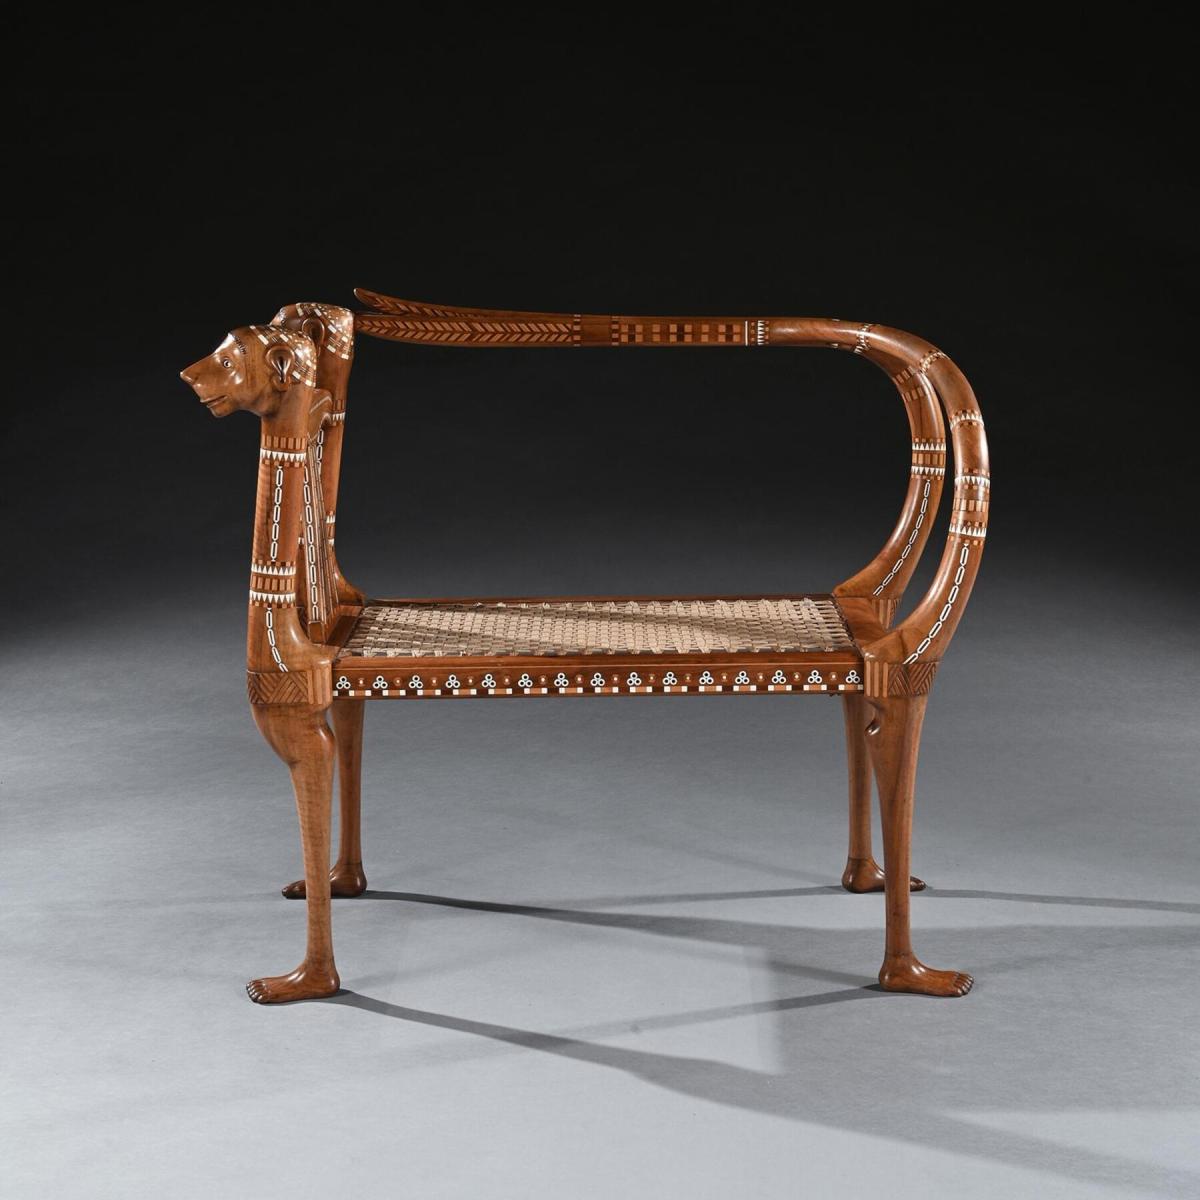 Exhibition Quality Egyptian Revival Walnut and Inlaid Bench or Window Seat